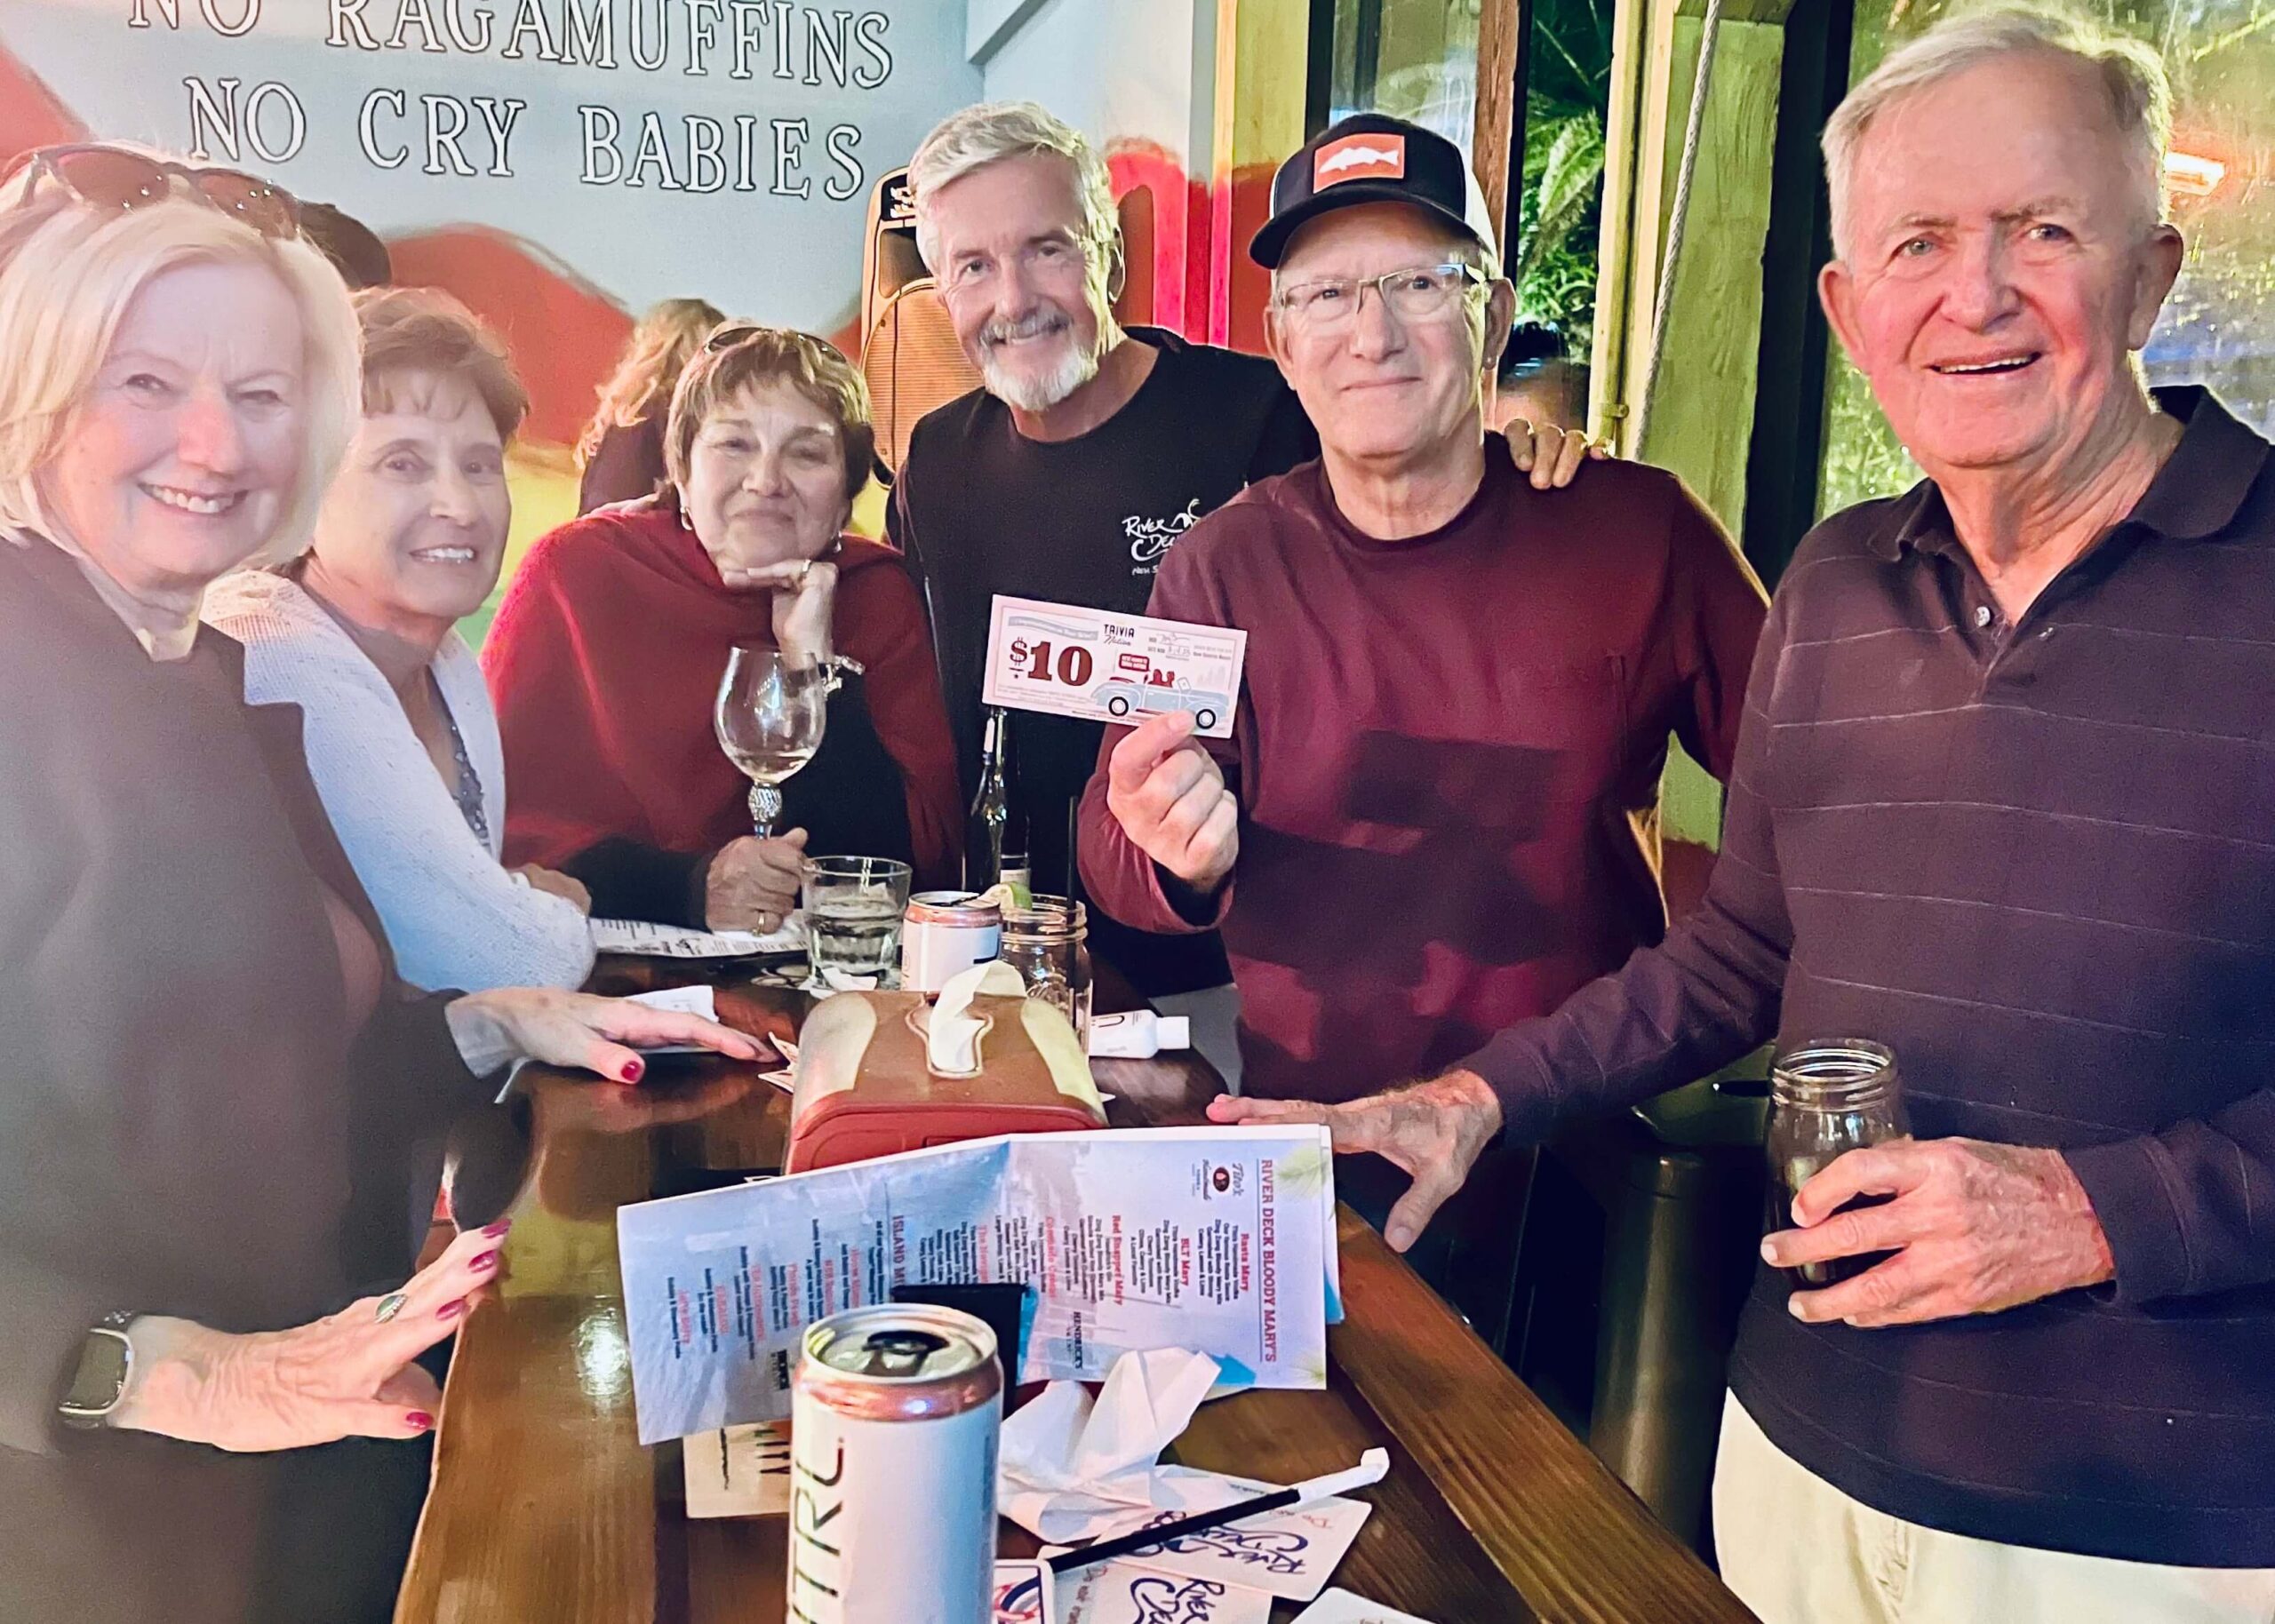 River Deck Tiki Bar & Restaurant New Smyrna Beach FL 32168 trivia night: group of older men and women smiling and standing around a table with one man holding up a $10 trivia coupon